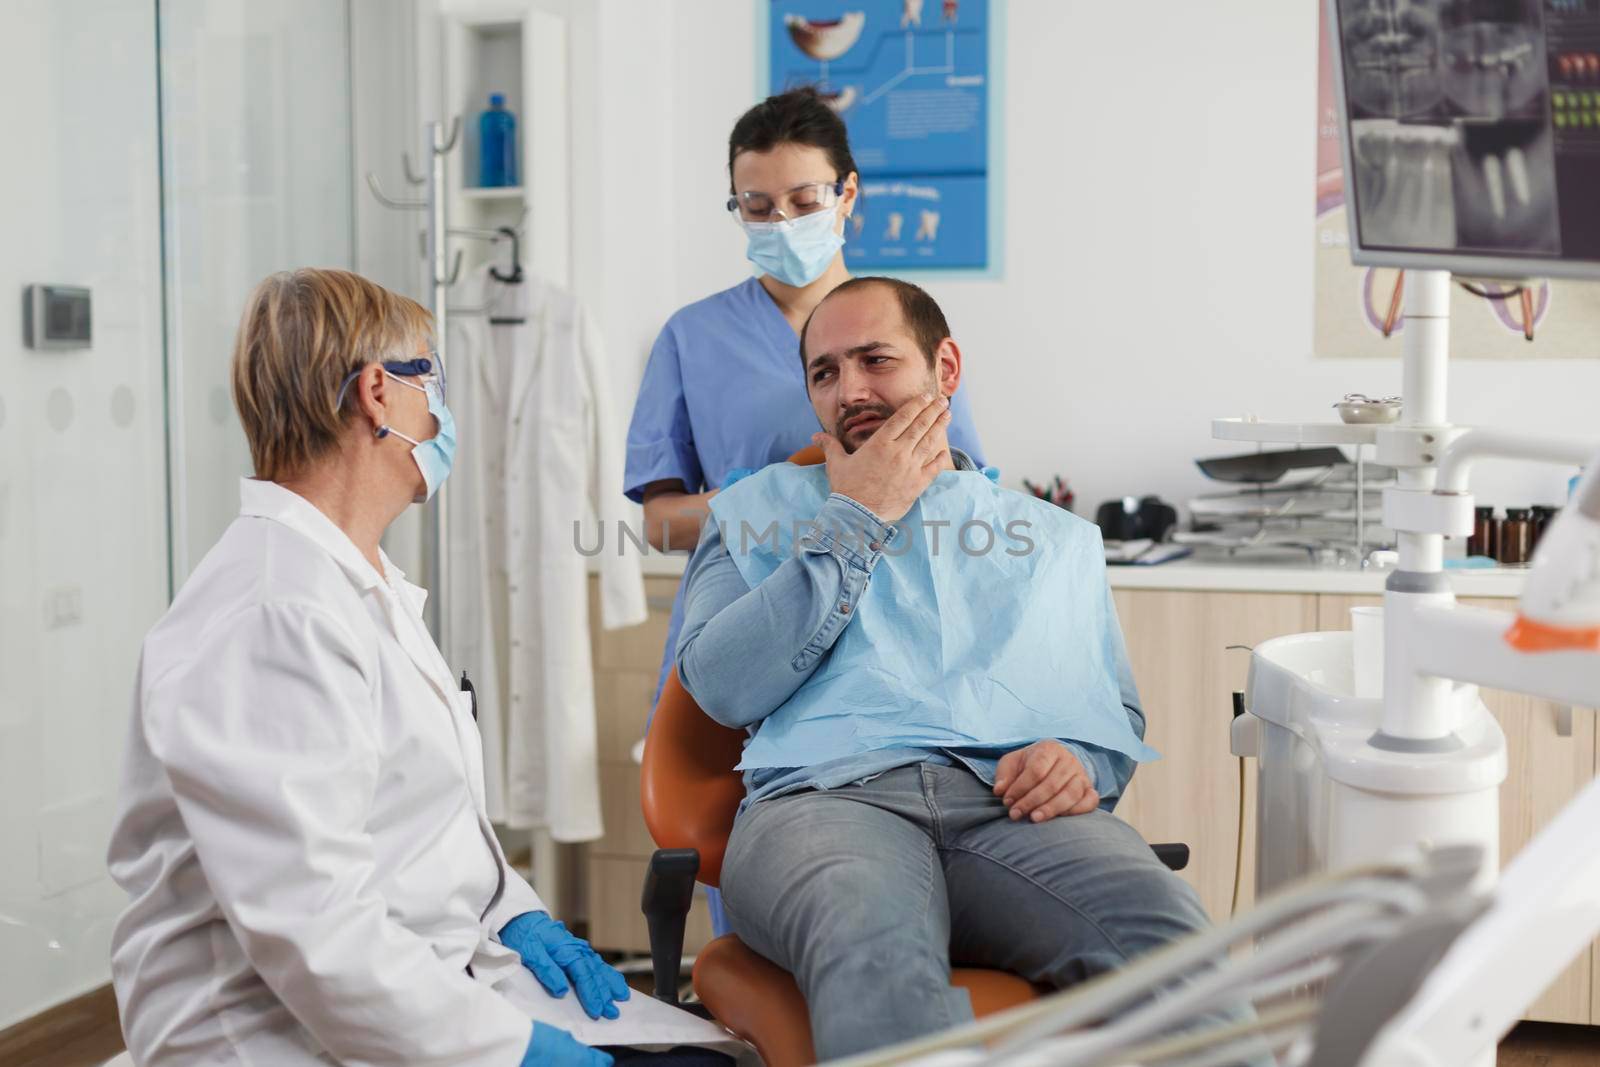 Orthodontist senior woman doctor explaining oral hygiene to patient with toothache discussing healthcare treatment during stomatological consultation in dental office room. Concept of medicine service